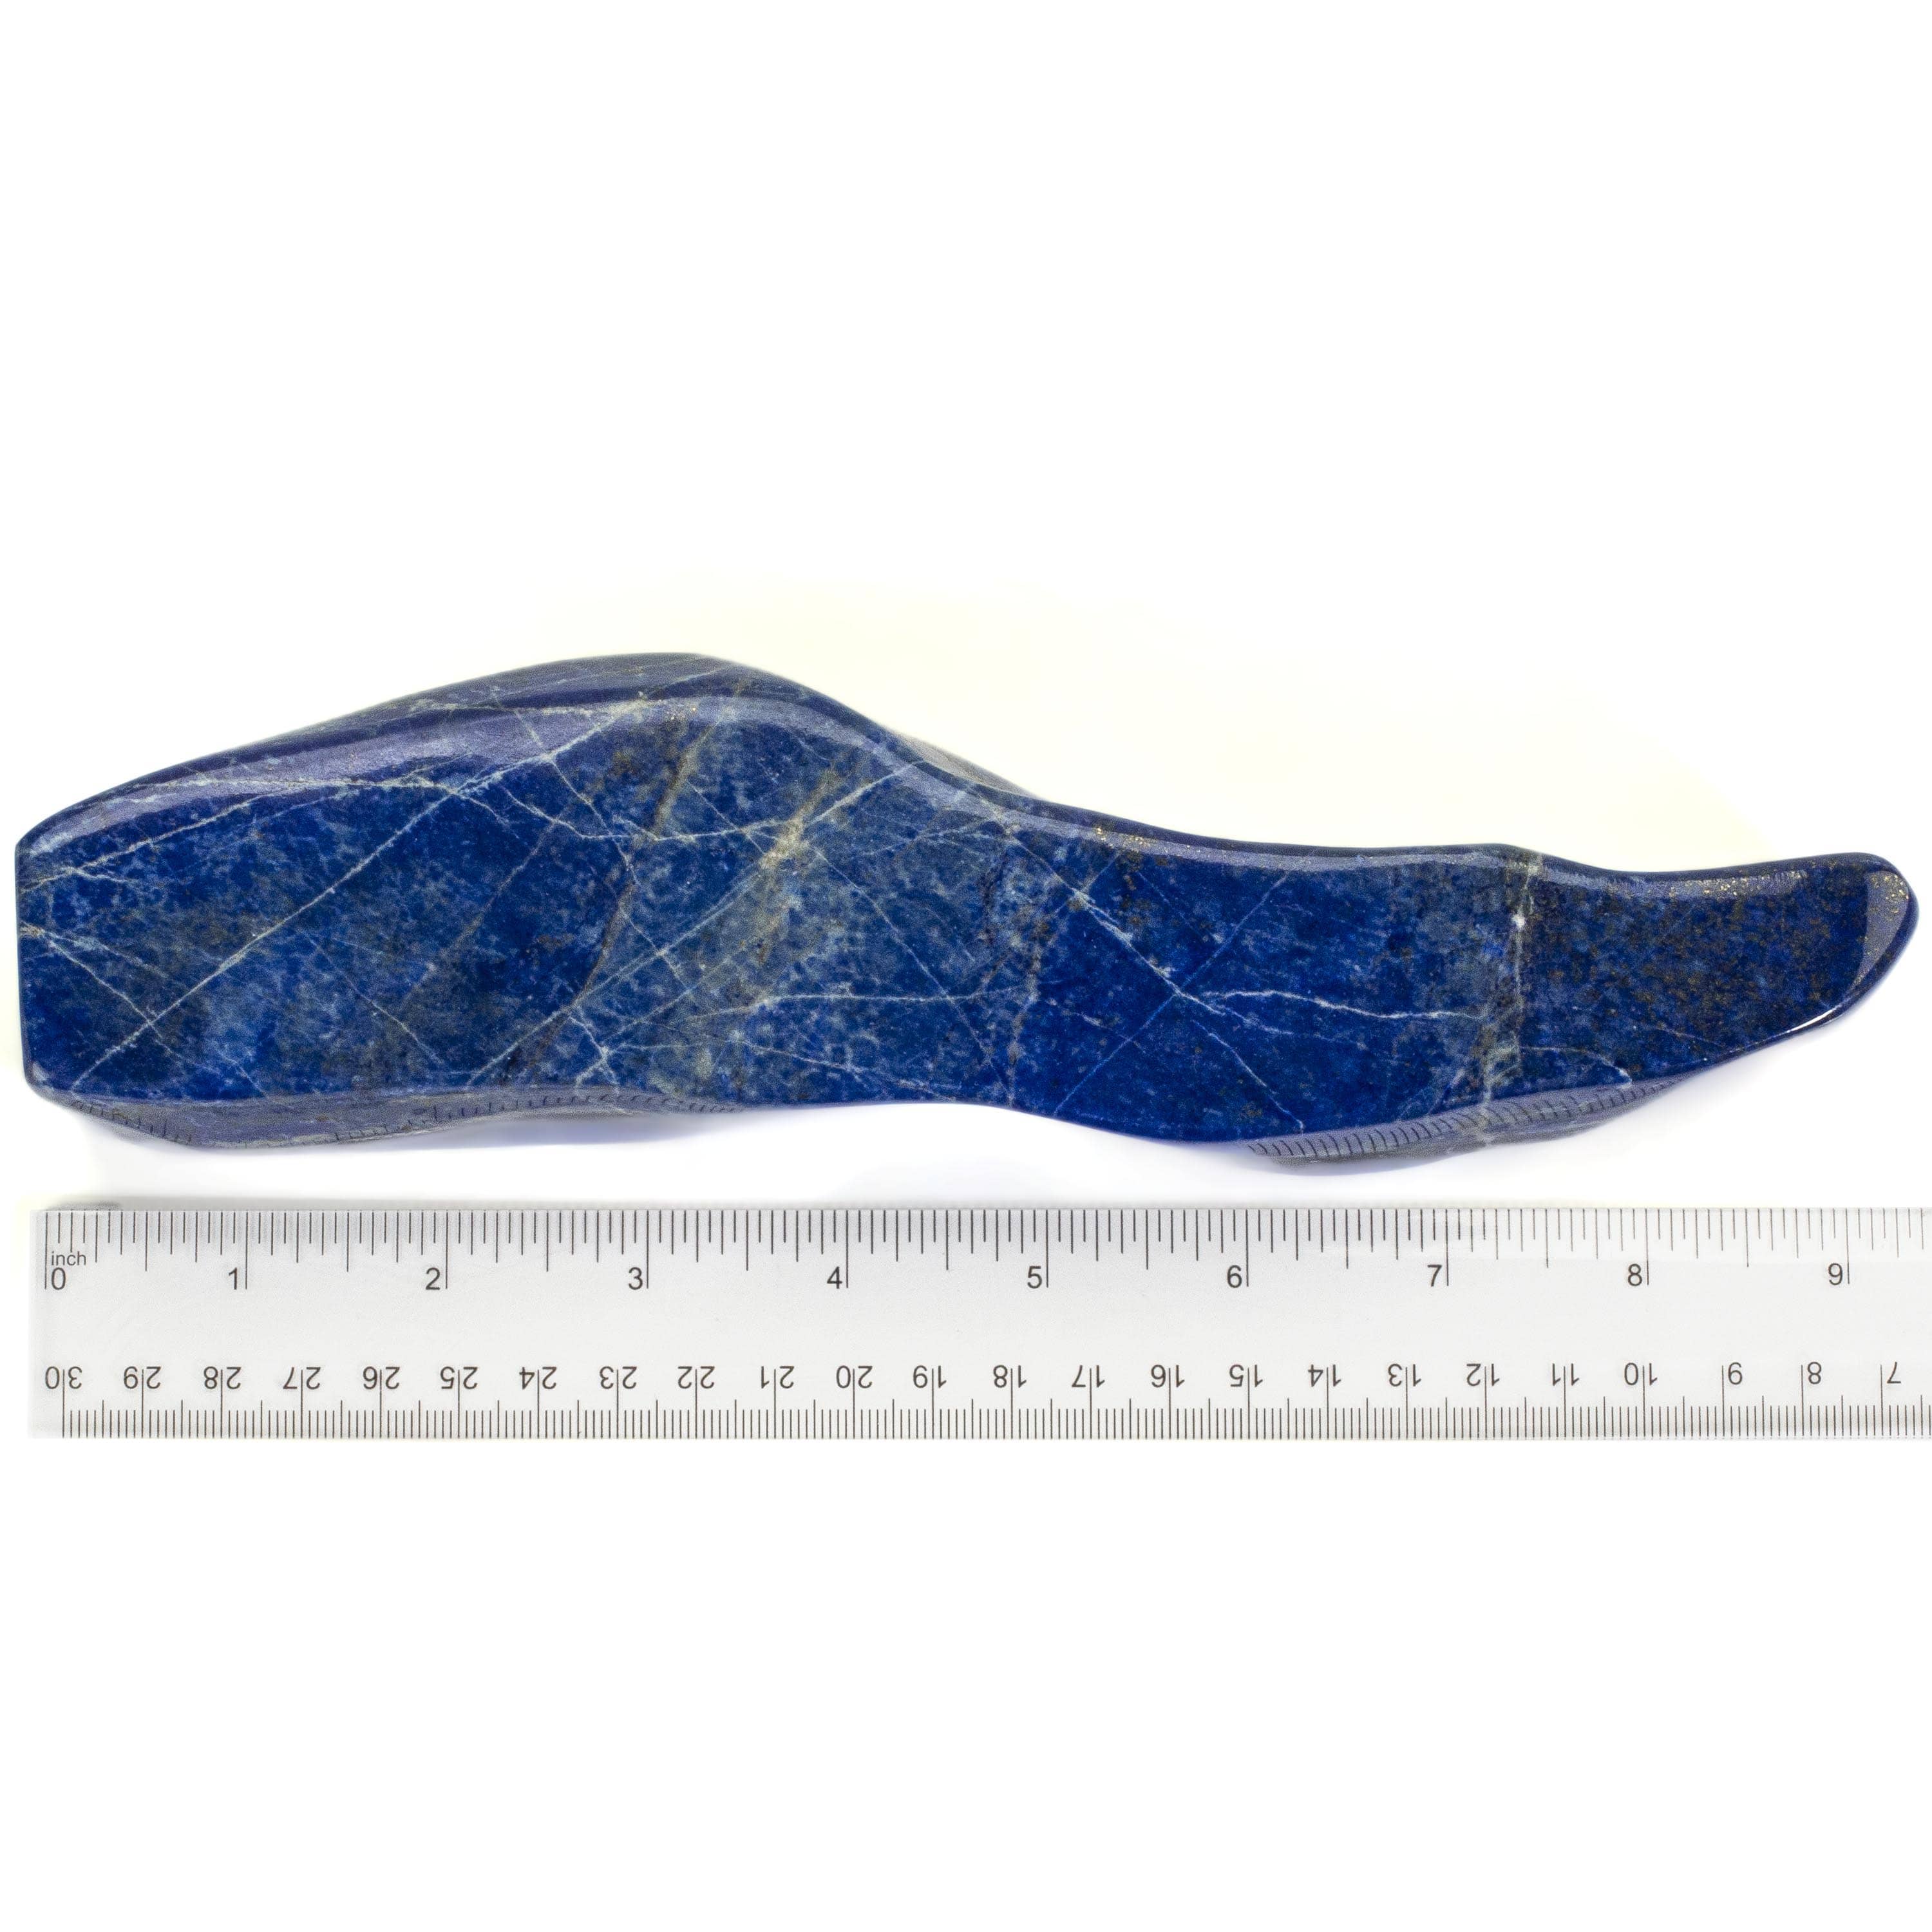 Kalifano Lapis Lapis Lazuil Freeform from Afghanistan - 1 kg / 2.2 lbs LP1100.005